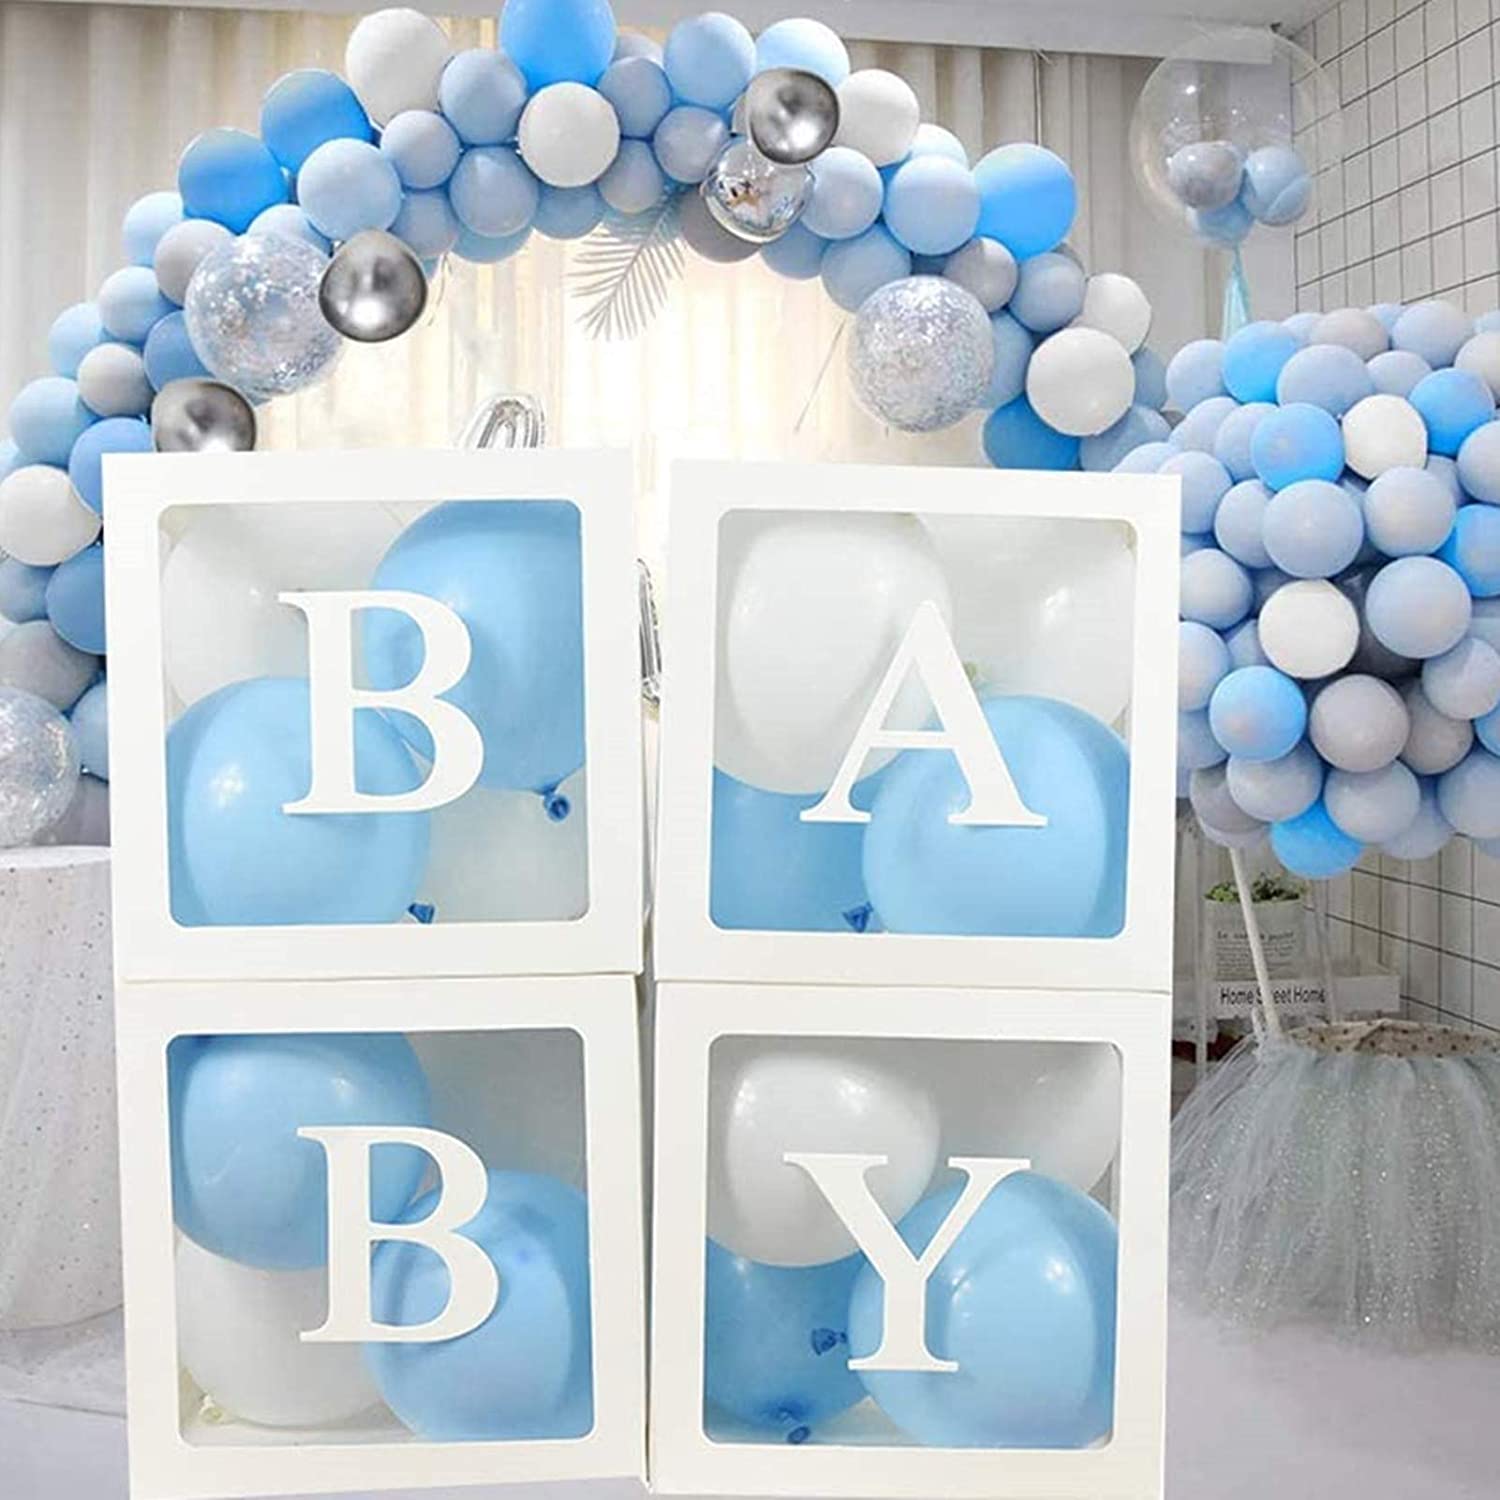  82PCS Baby Shower Decorations For Boy Kit - Jumbo Transparent  Baby Block Balloon Box Includes BABY, Alphabet Letters DYI, White Gray Baby  Blue Balloons, Gender Reveal Decor 1st Birthday Party Backdrop 